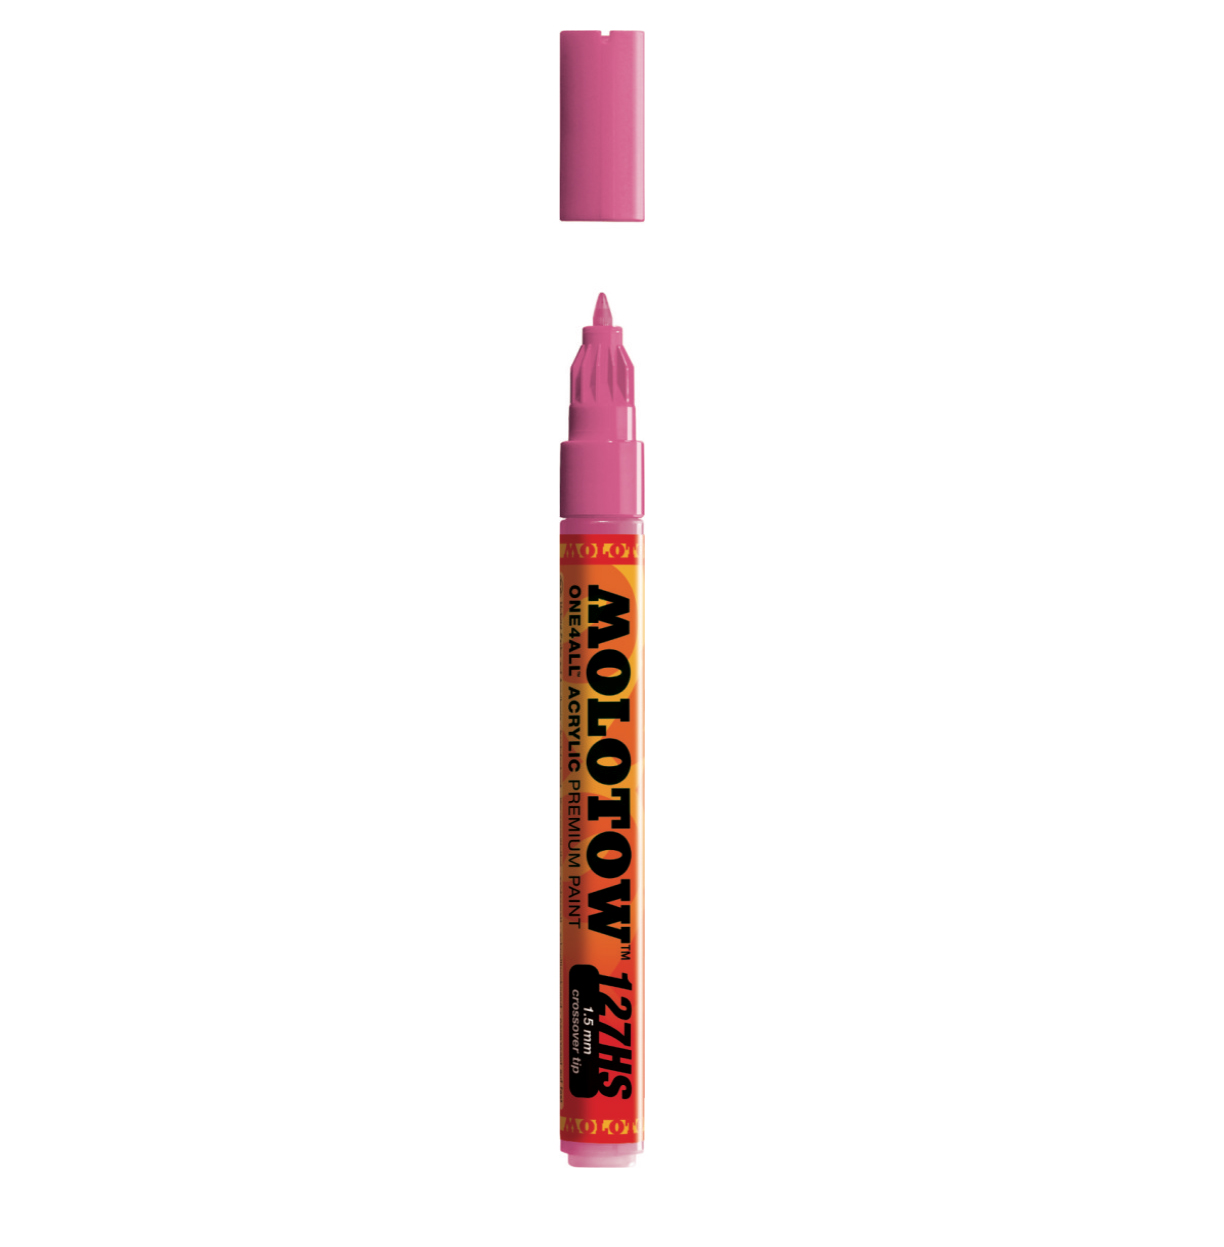 Molotow Co Tip 1.5Mm Neon Pink Paint Marker